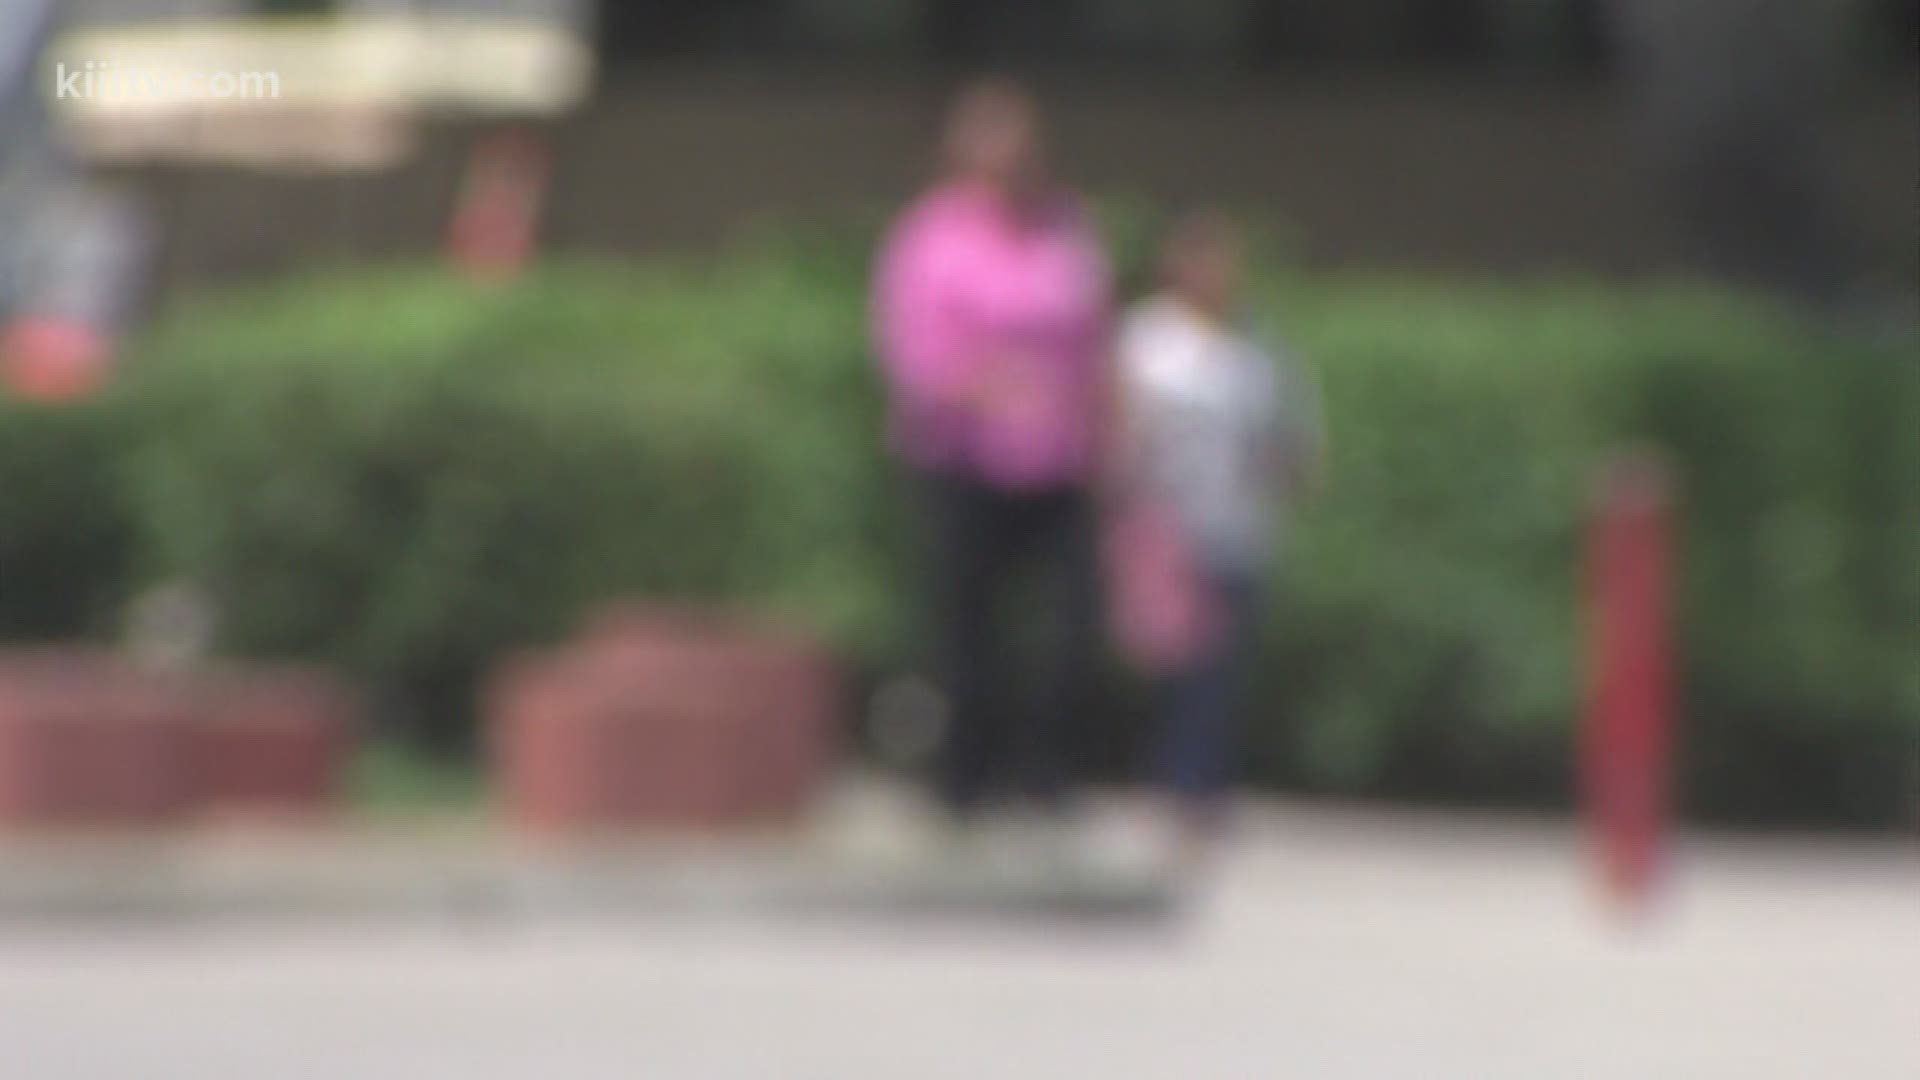 According to Corpus Christi Independent School District police, it was just after 9 a.m. Thursday when at 16-year-old male suspect tried to kidnap his girlfriend. The suspect grabbed his girlfriend's hand and carried her away when she refused to skip class.